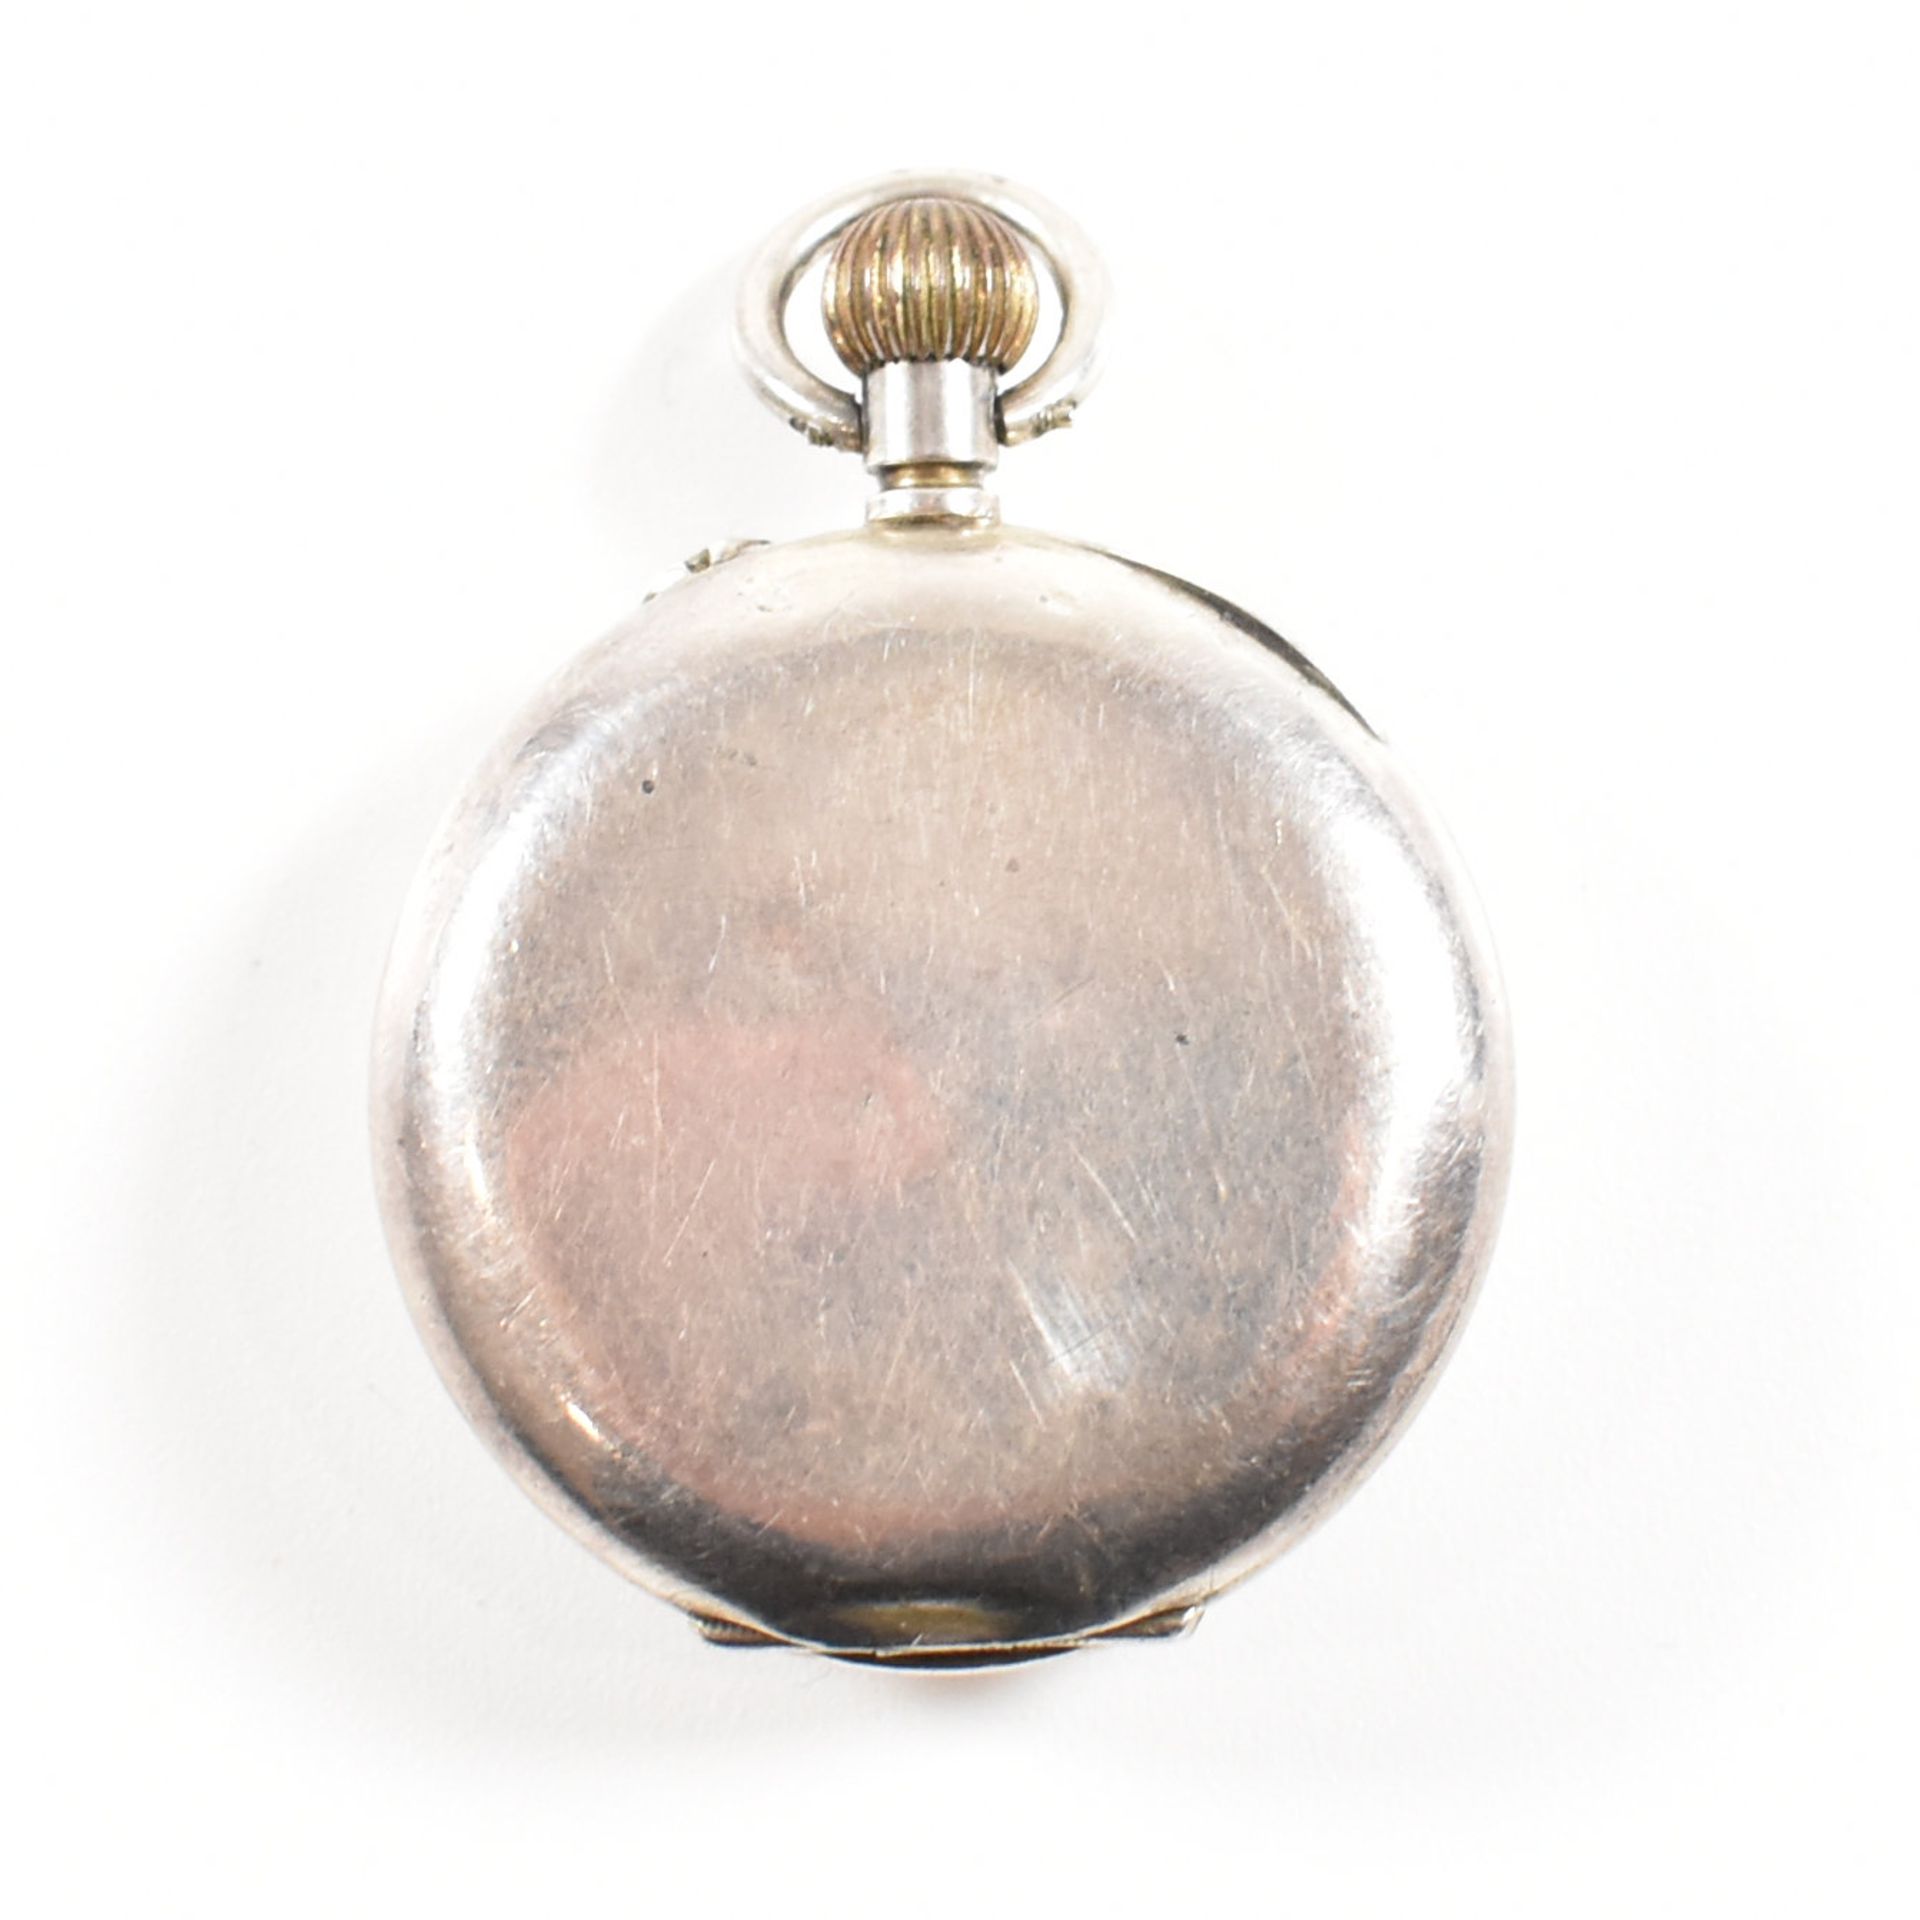 EARLY 20TH CENTURY SILVER FOB POCKET WATCH - Image 2 of 7